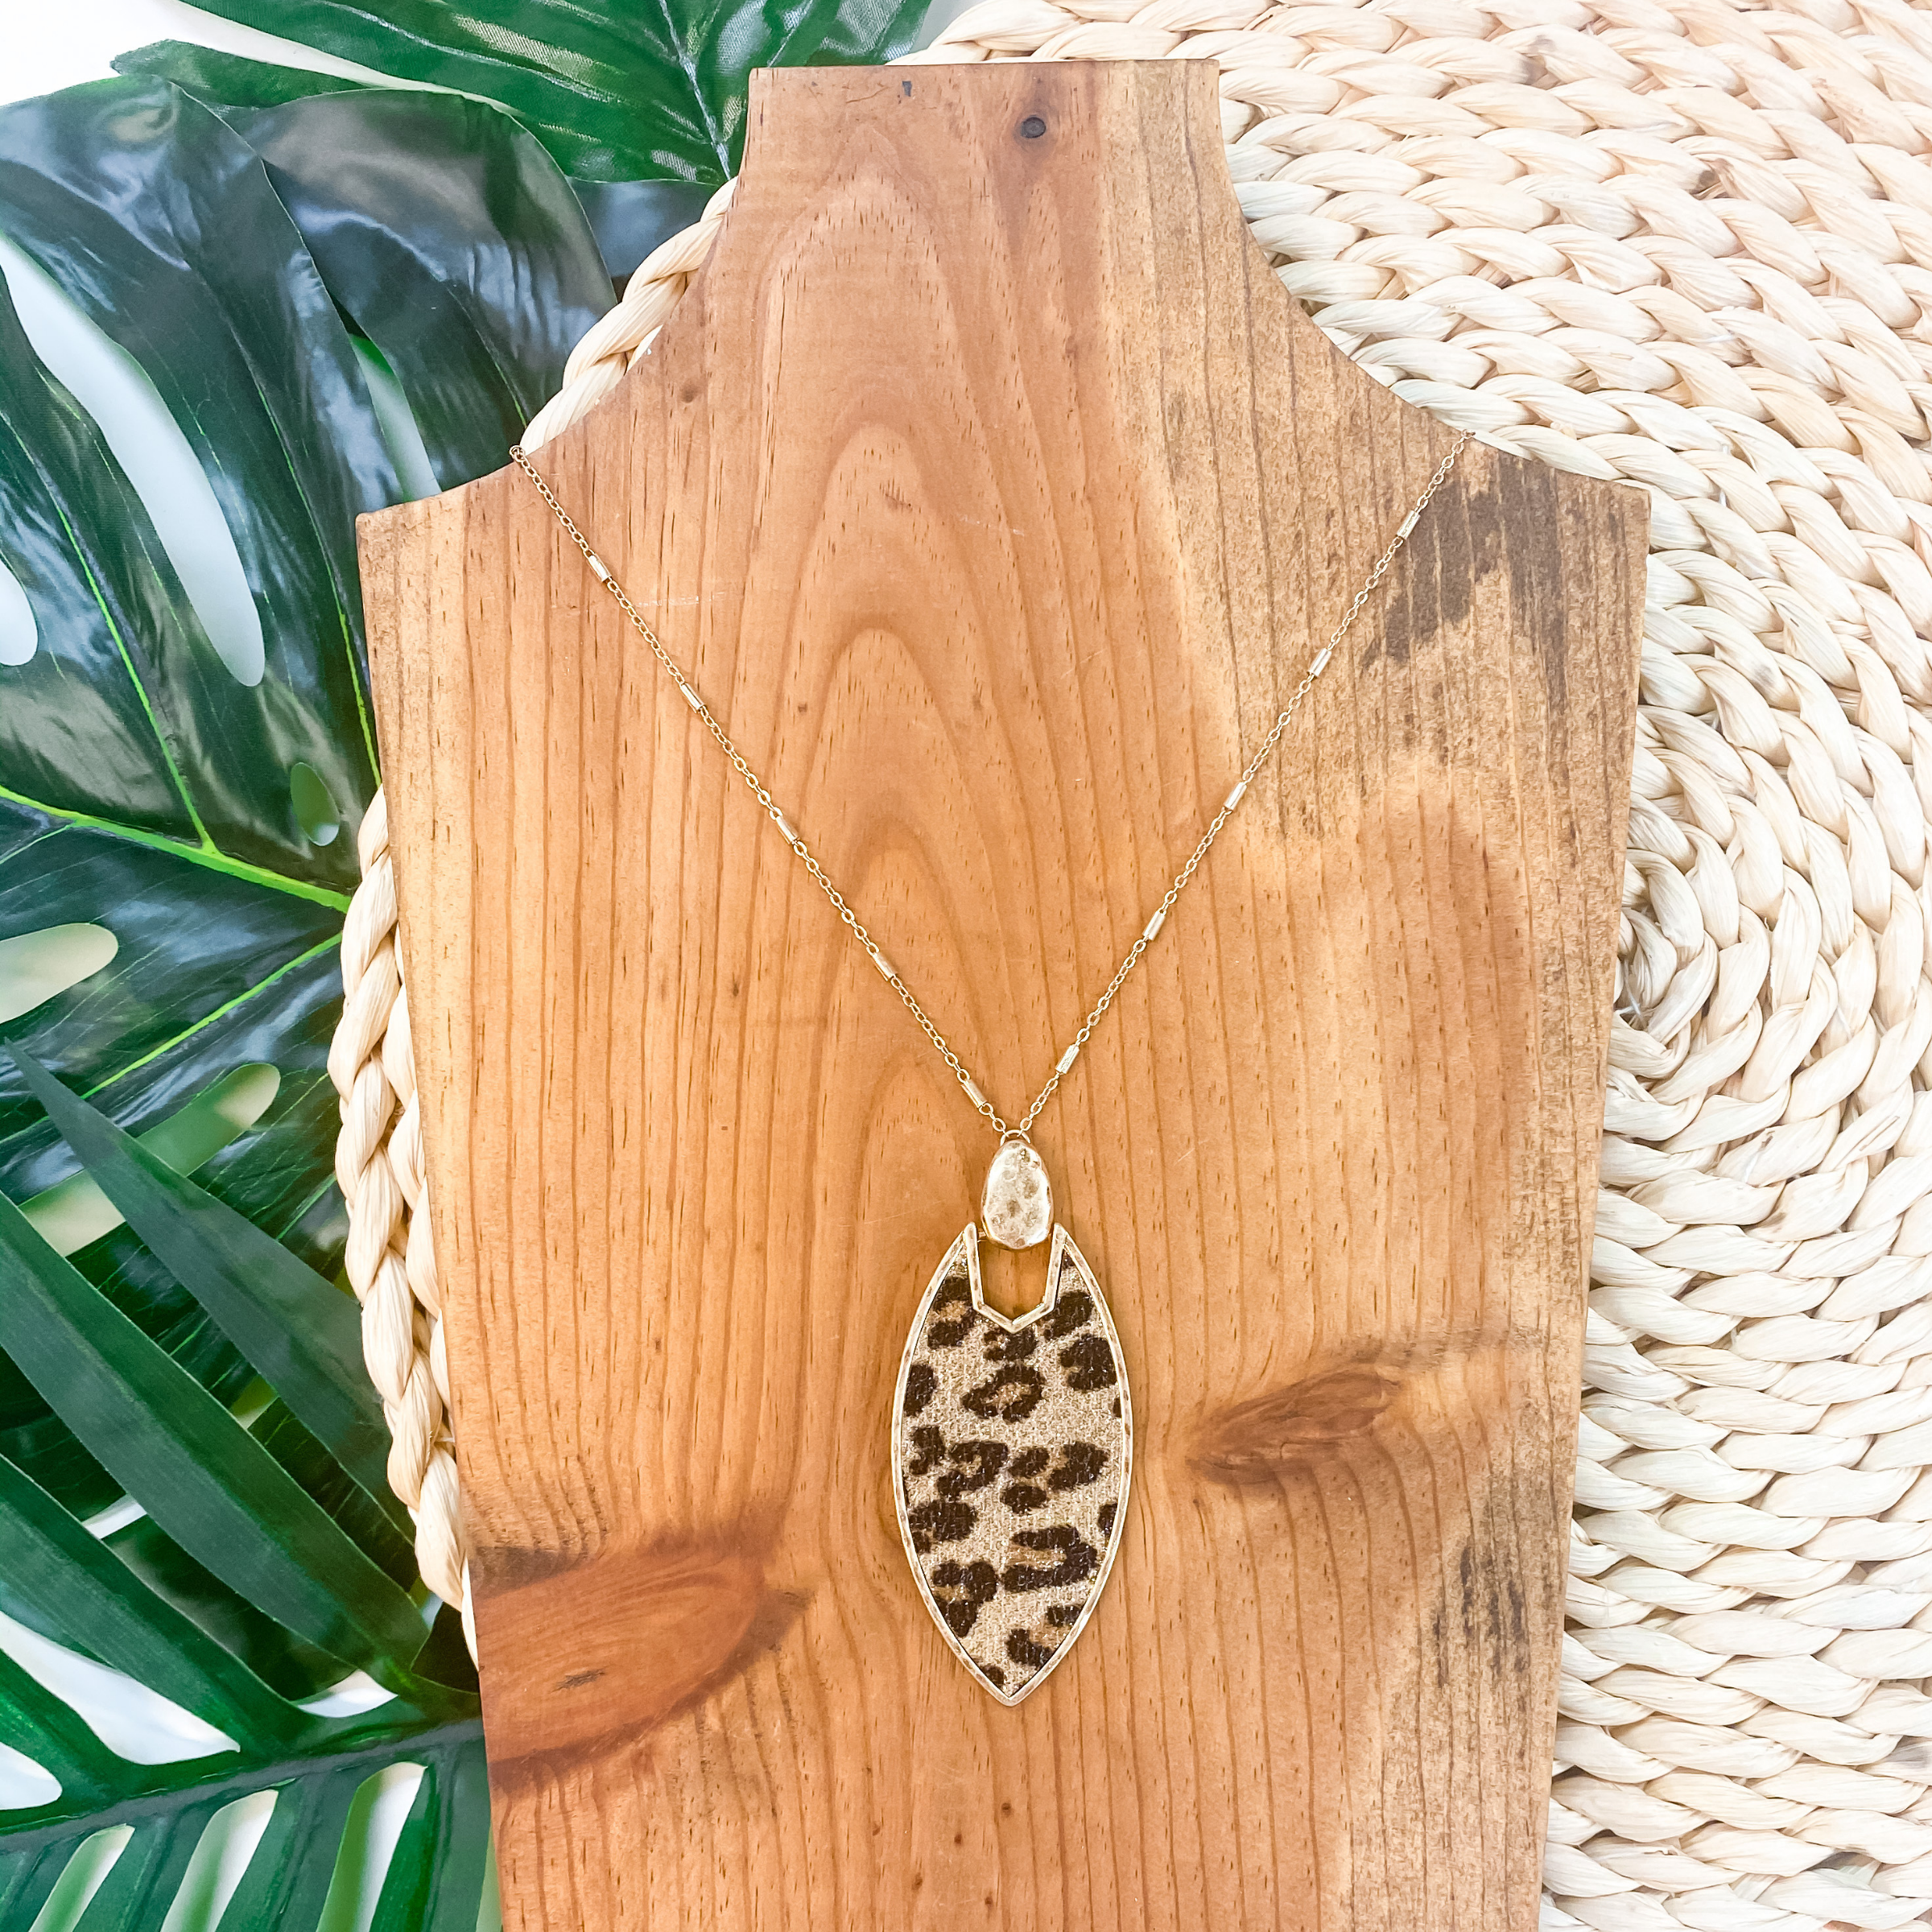 Gold Teardrop Necklace in Leopard Print - Giddy Up Glamour Boutique